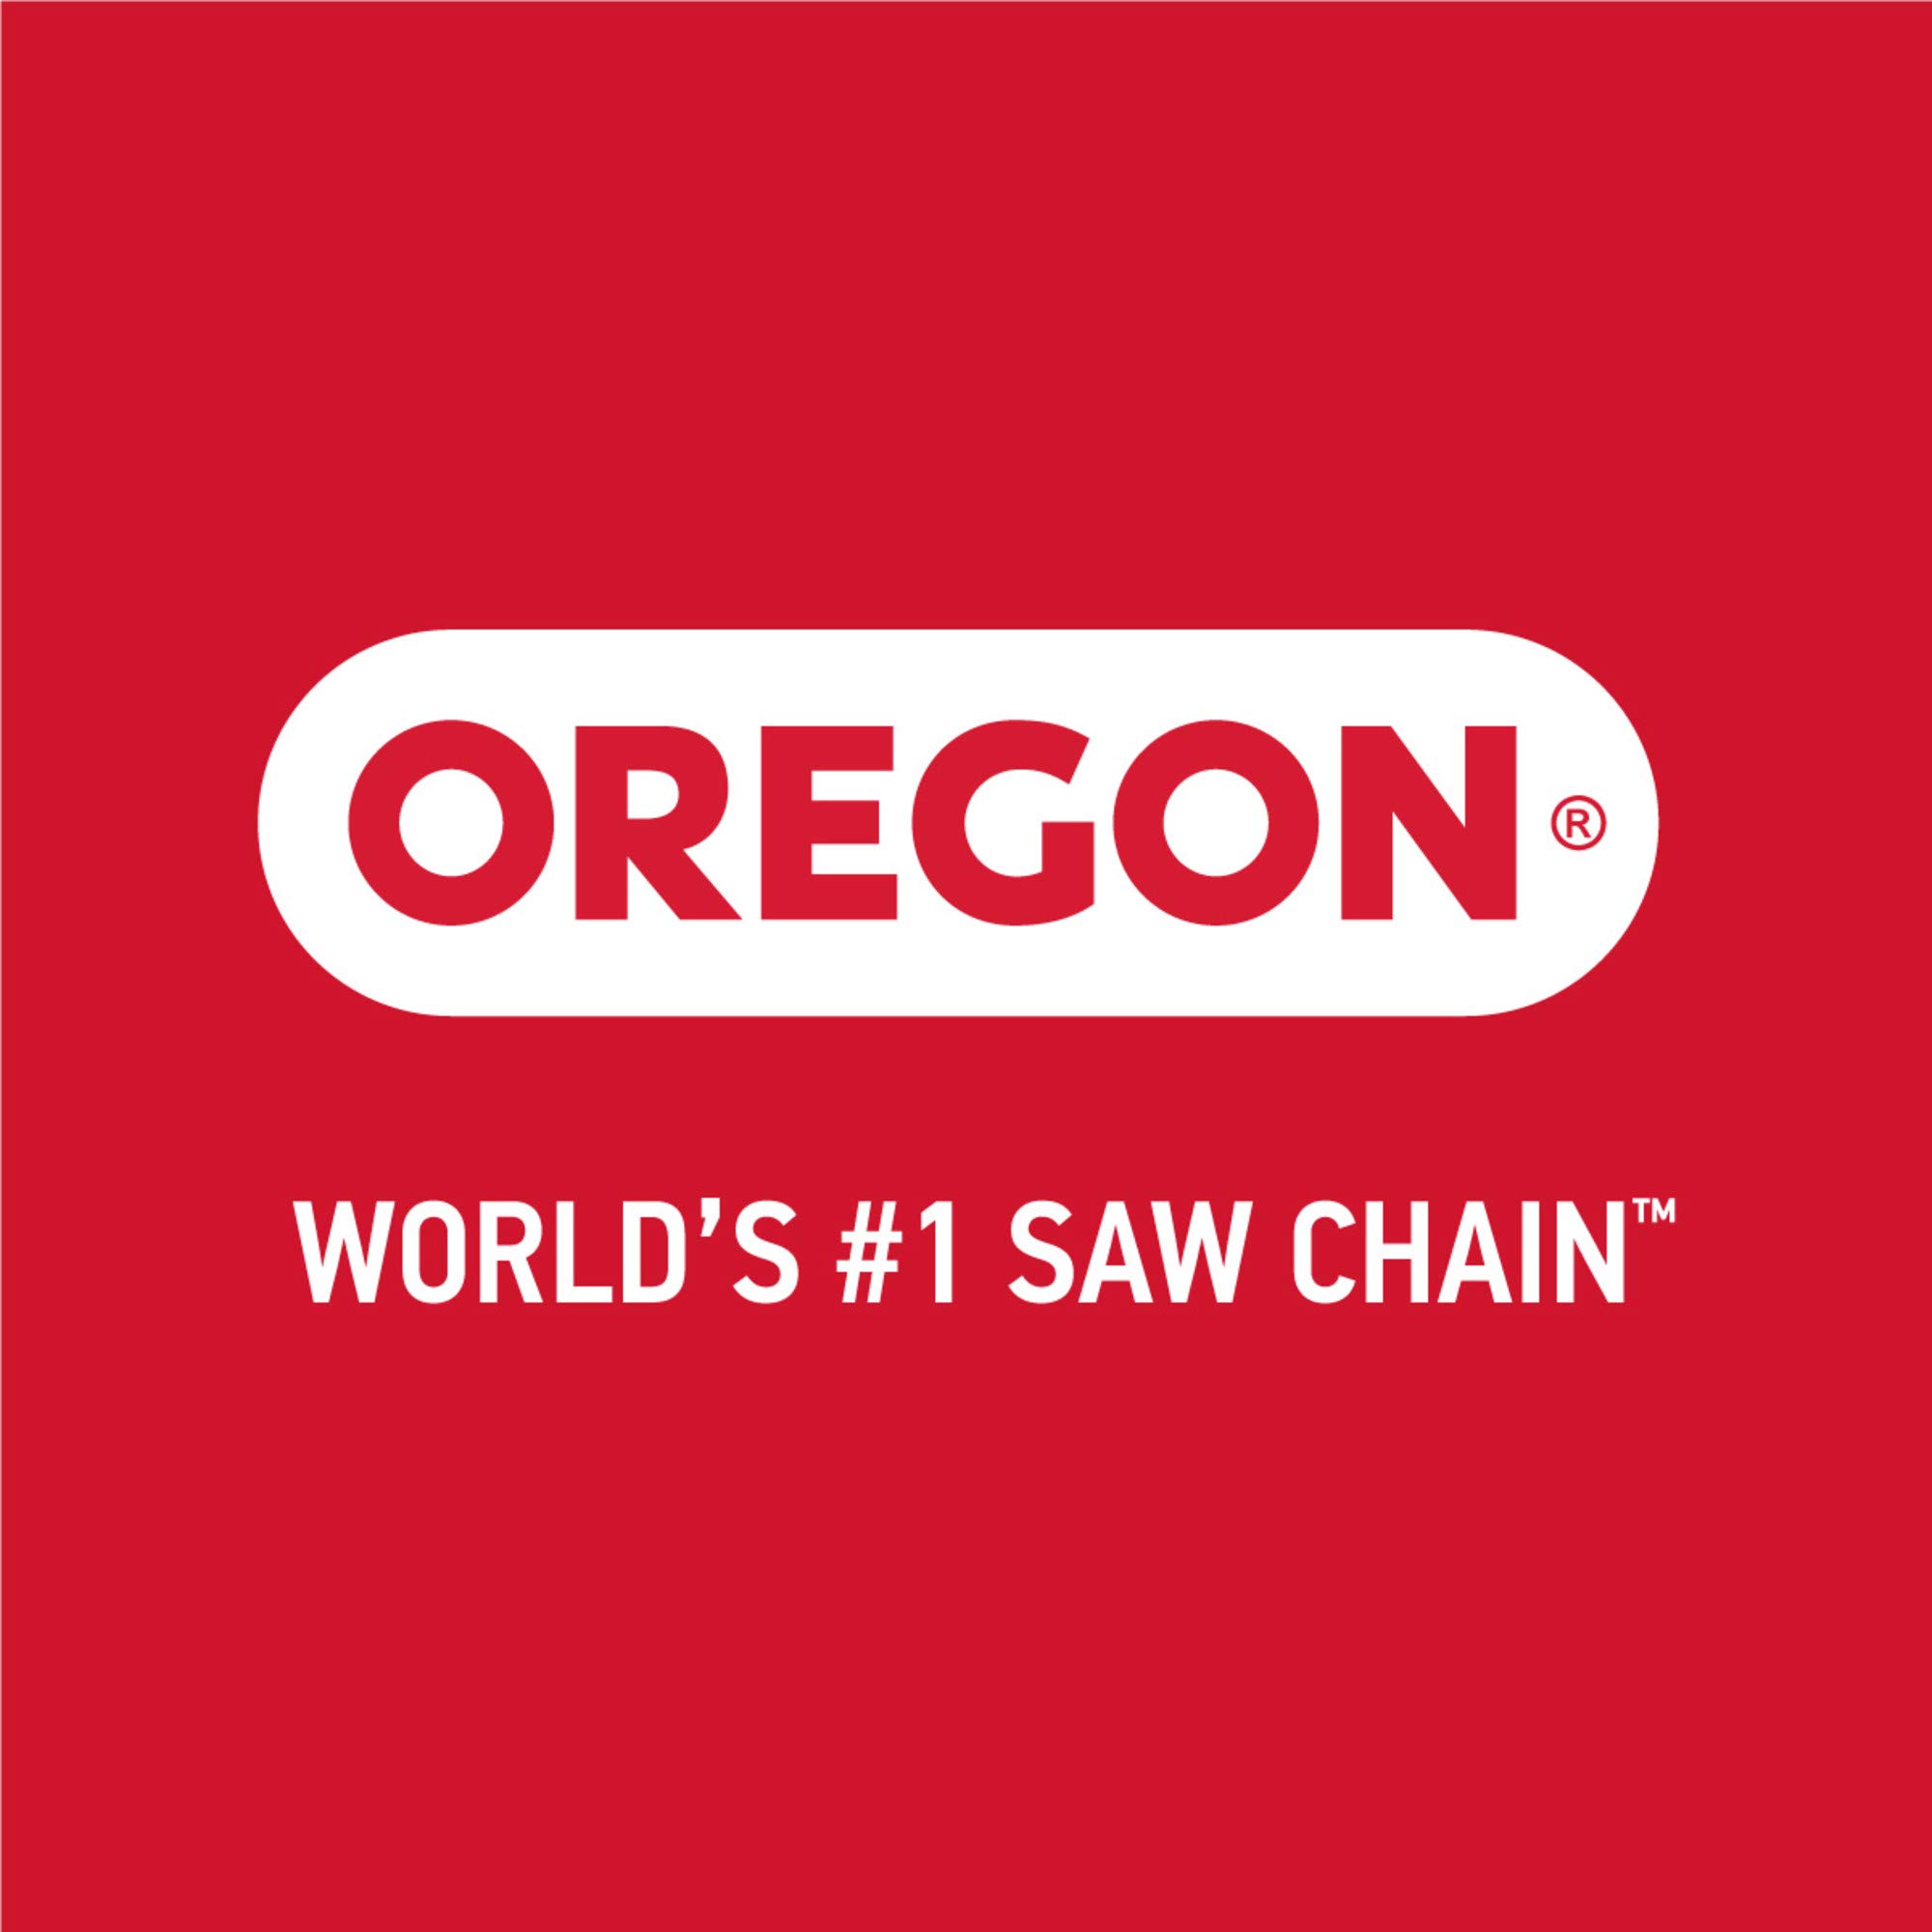 Oregon D60 AdvanceCut Replacement Chainsaw Chain for 16-Inch Guide Bars, 60 Drive Links, Pitch: 3/8" Low Kickback, .050" Gauge, Fits Husqvarna, Echo, Stihl, Poulan, Craftsman and More